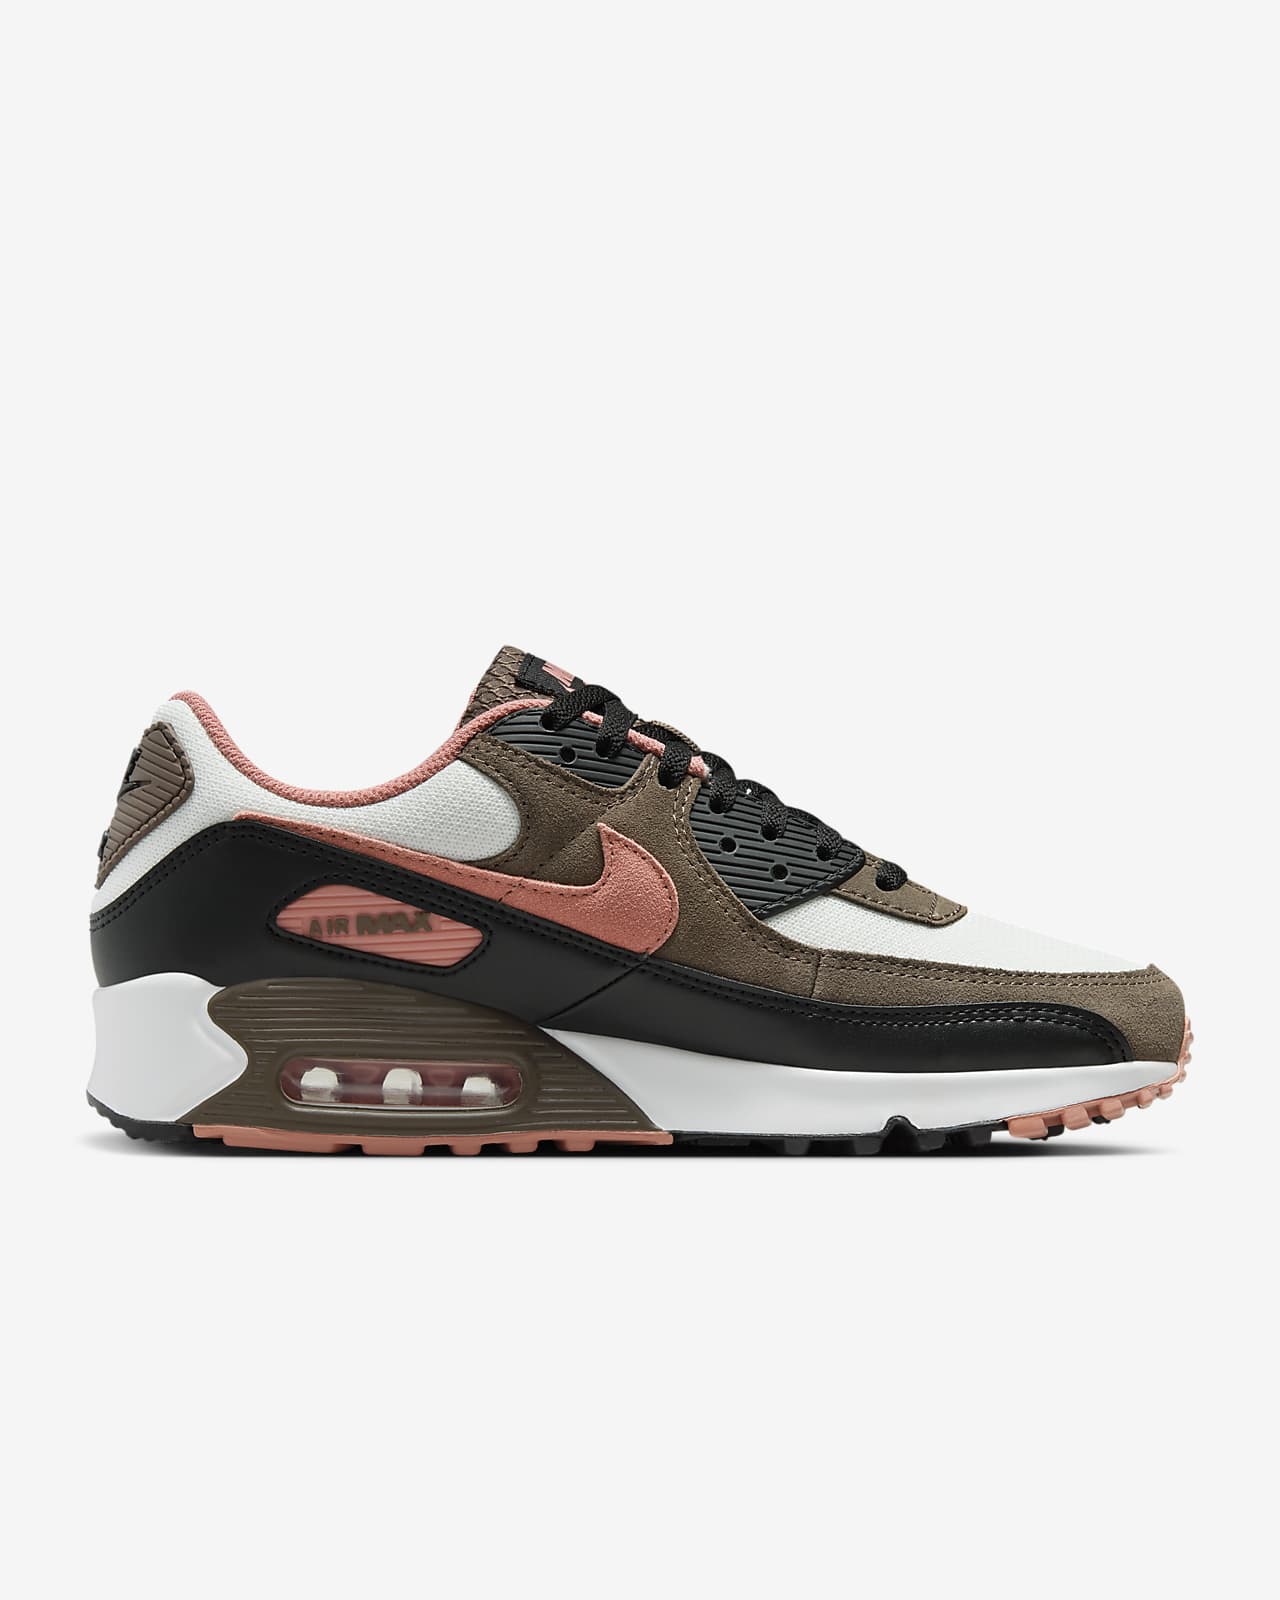 Explore the Latest Collection of Pink Nike Shoes Air Max | Nike Famous Running Shoes & More